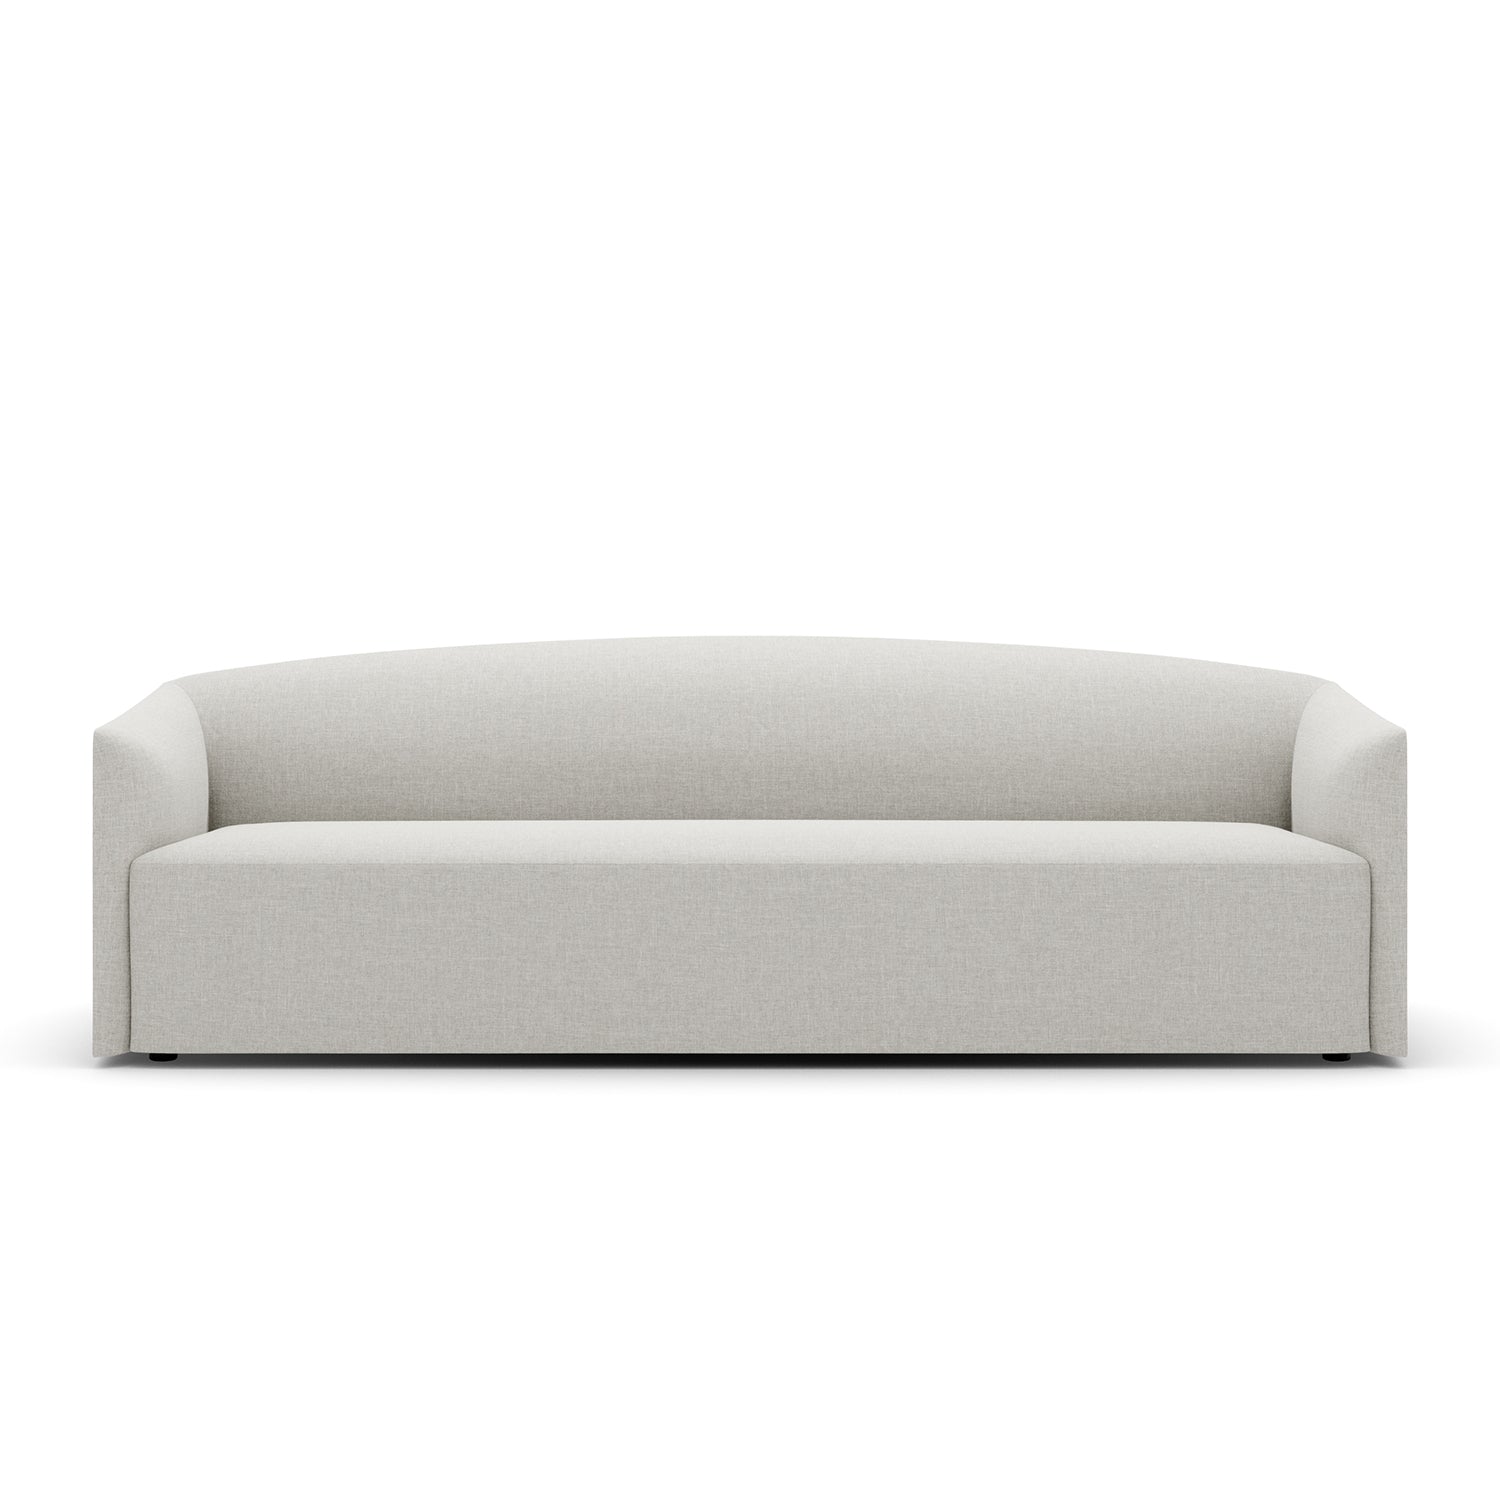 New Works Shore 3 Seater Sofa in quill